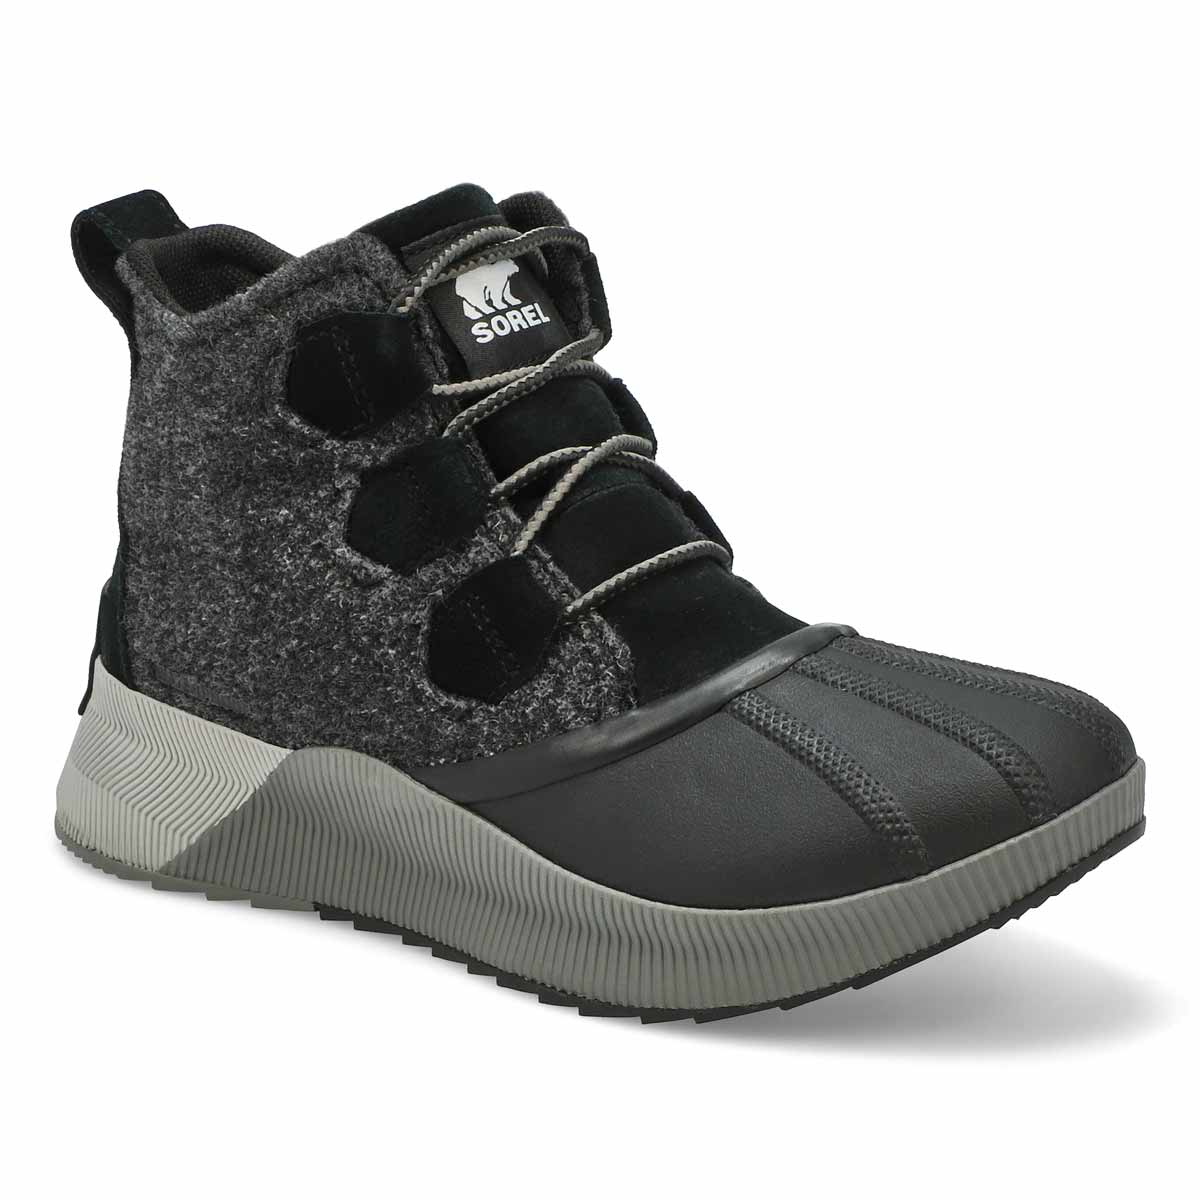 Sorel Women's Out'N About III Waterproof Boot | SoftMoc.com